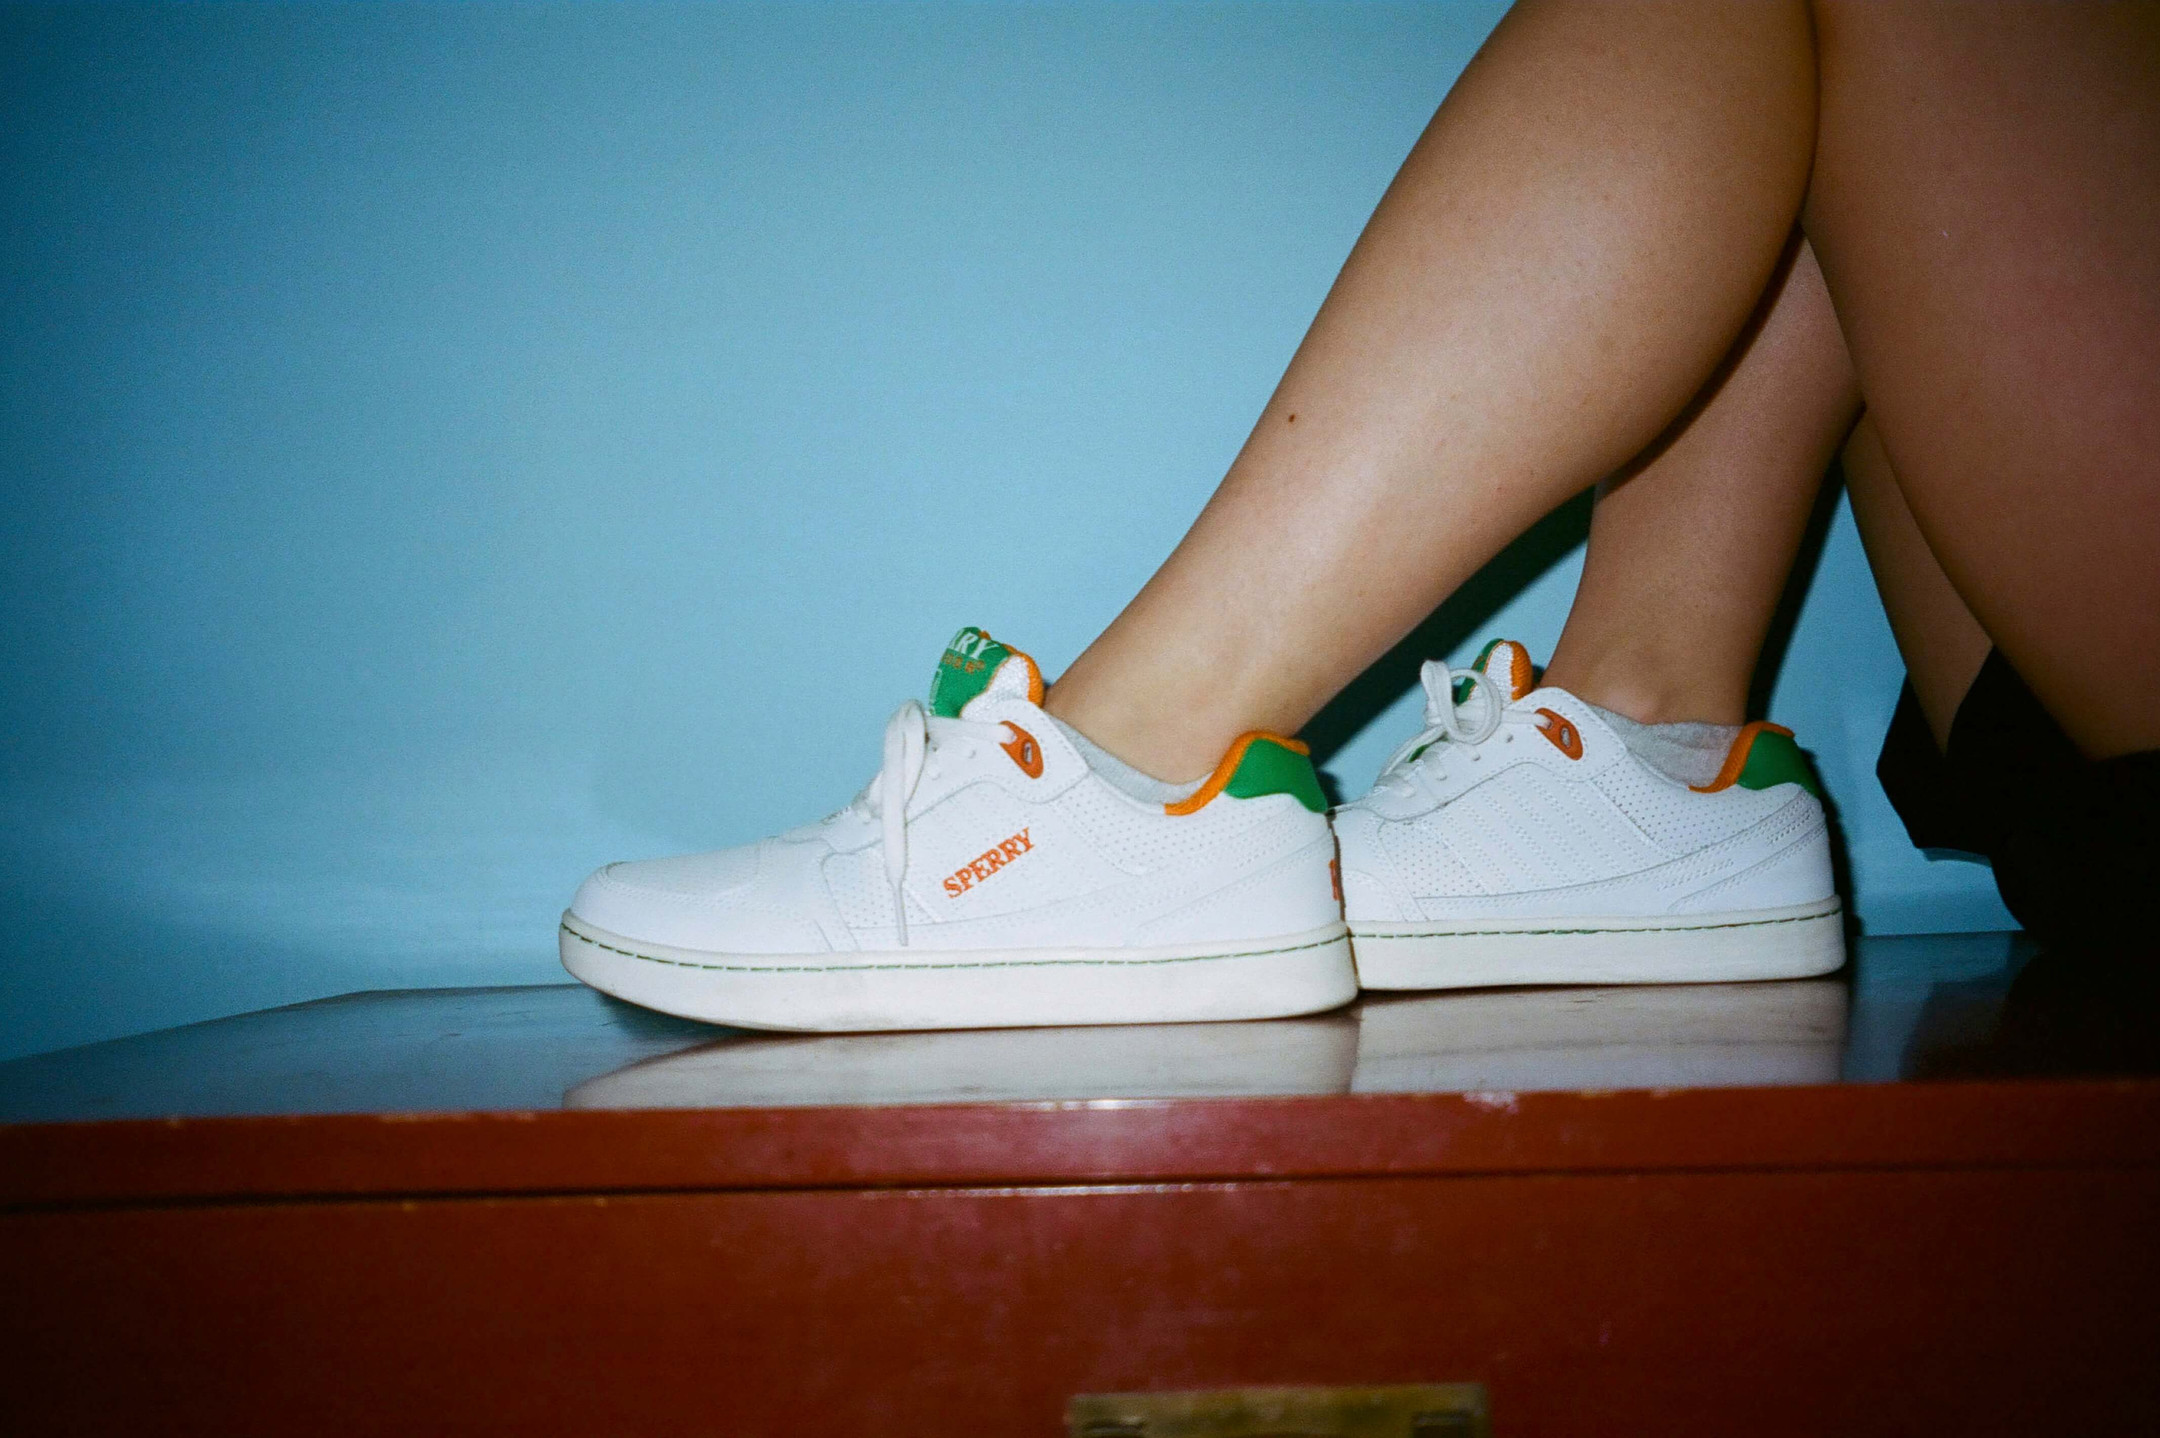 Female model wearing the Sperry x Rowing Blazers Cloud Cup Sneakers in orange and green